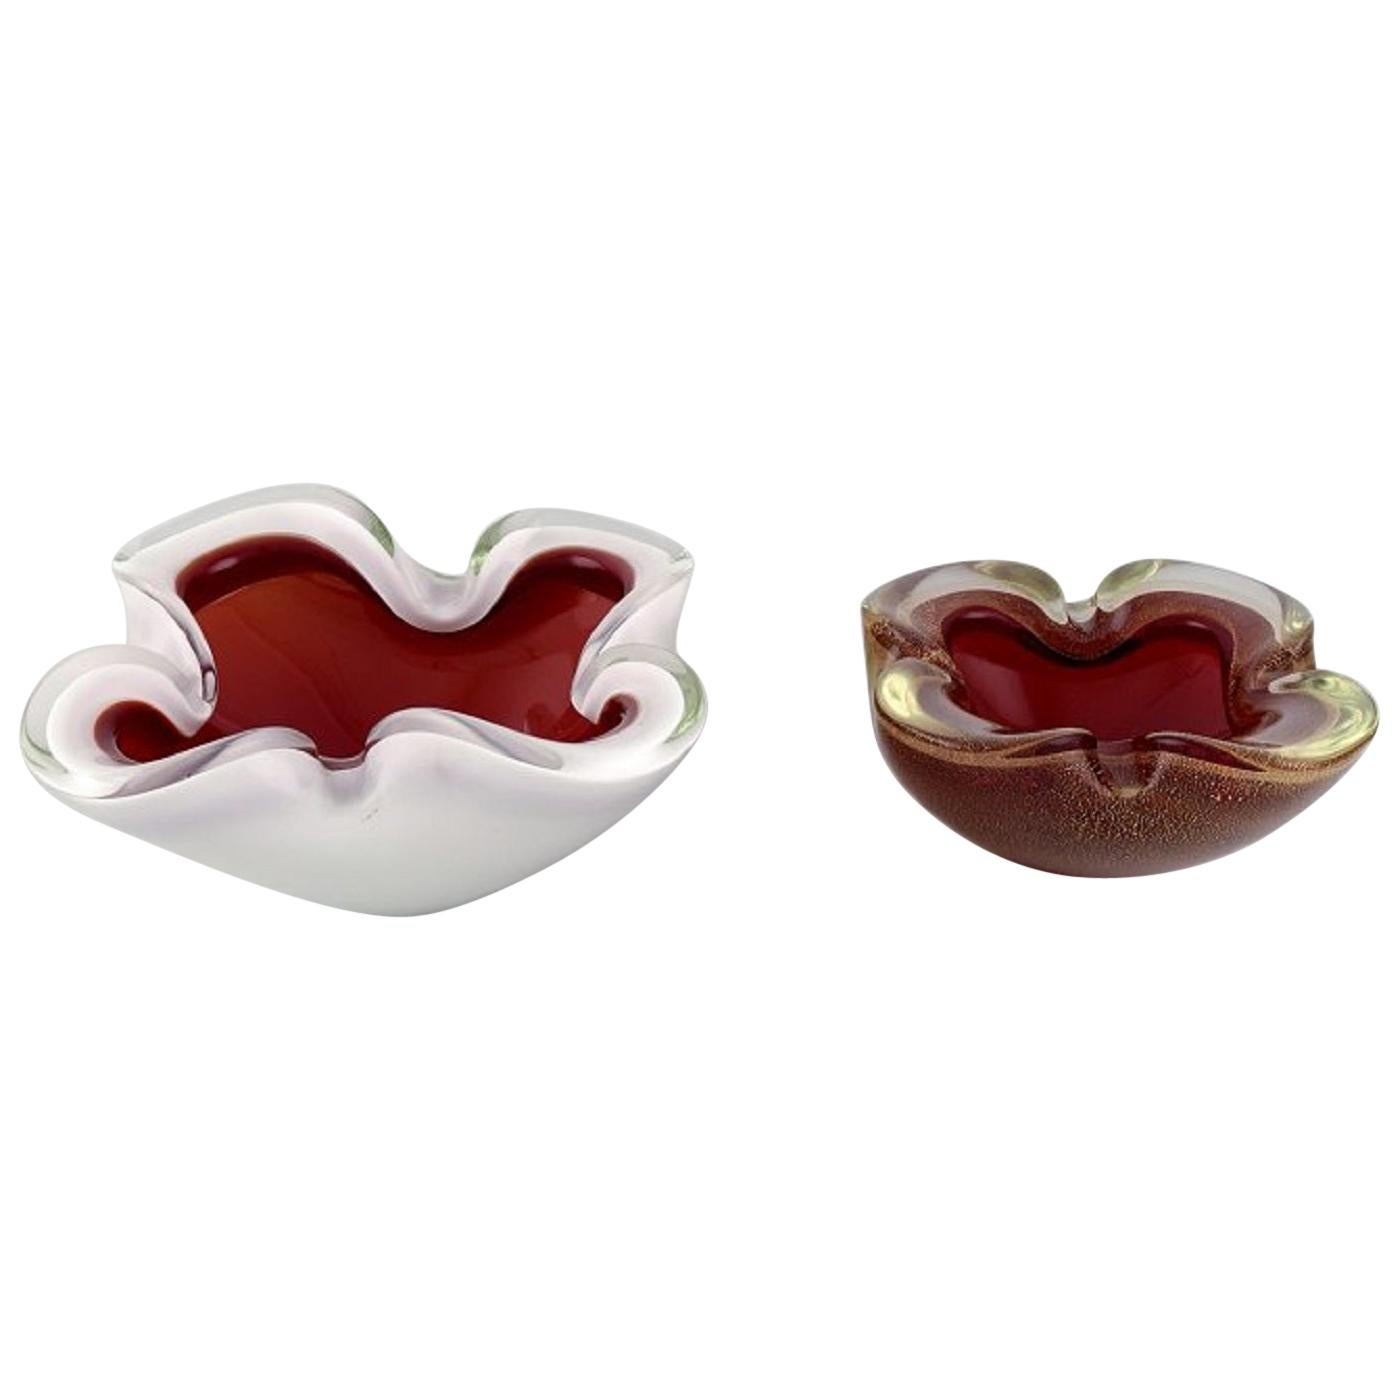 Two Murano Bowls in Red and White Mouth Blown Art Glass, Italian Design, 1960s For Sale